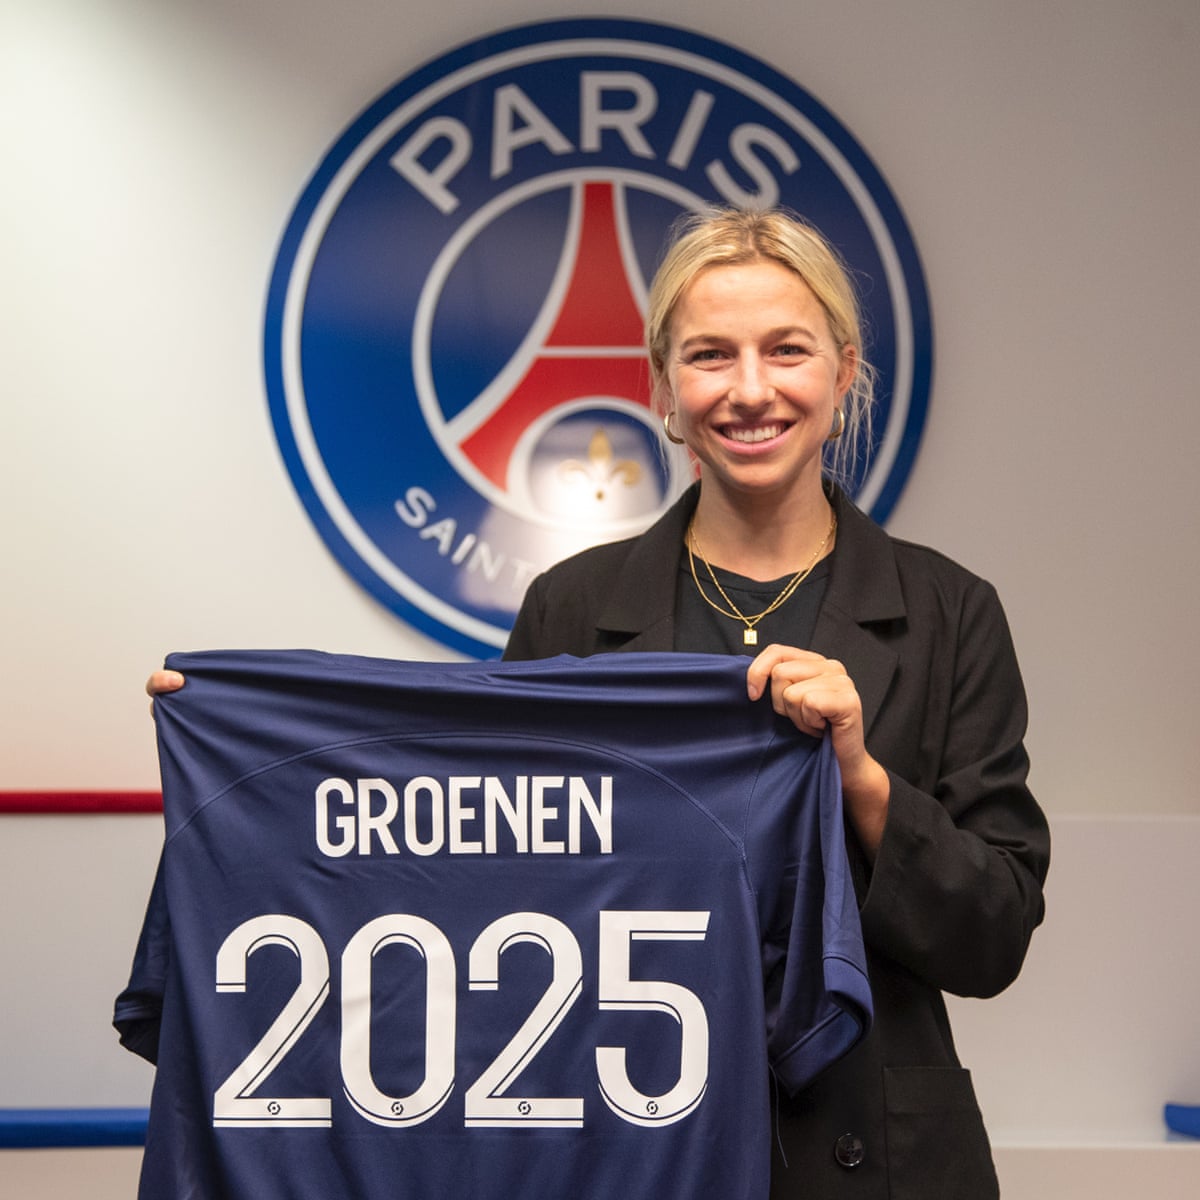 A Big Step': Jackie Groenen Leaves Manchester United To Join Psg |  Manchester United Women | The Guardian